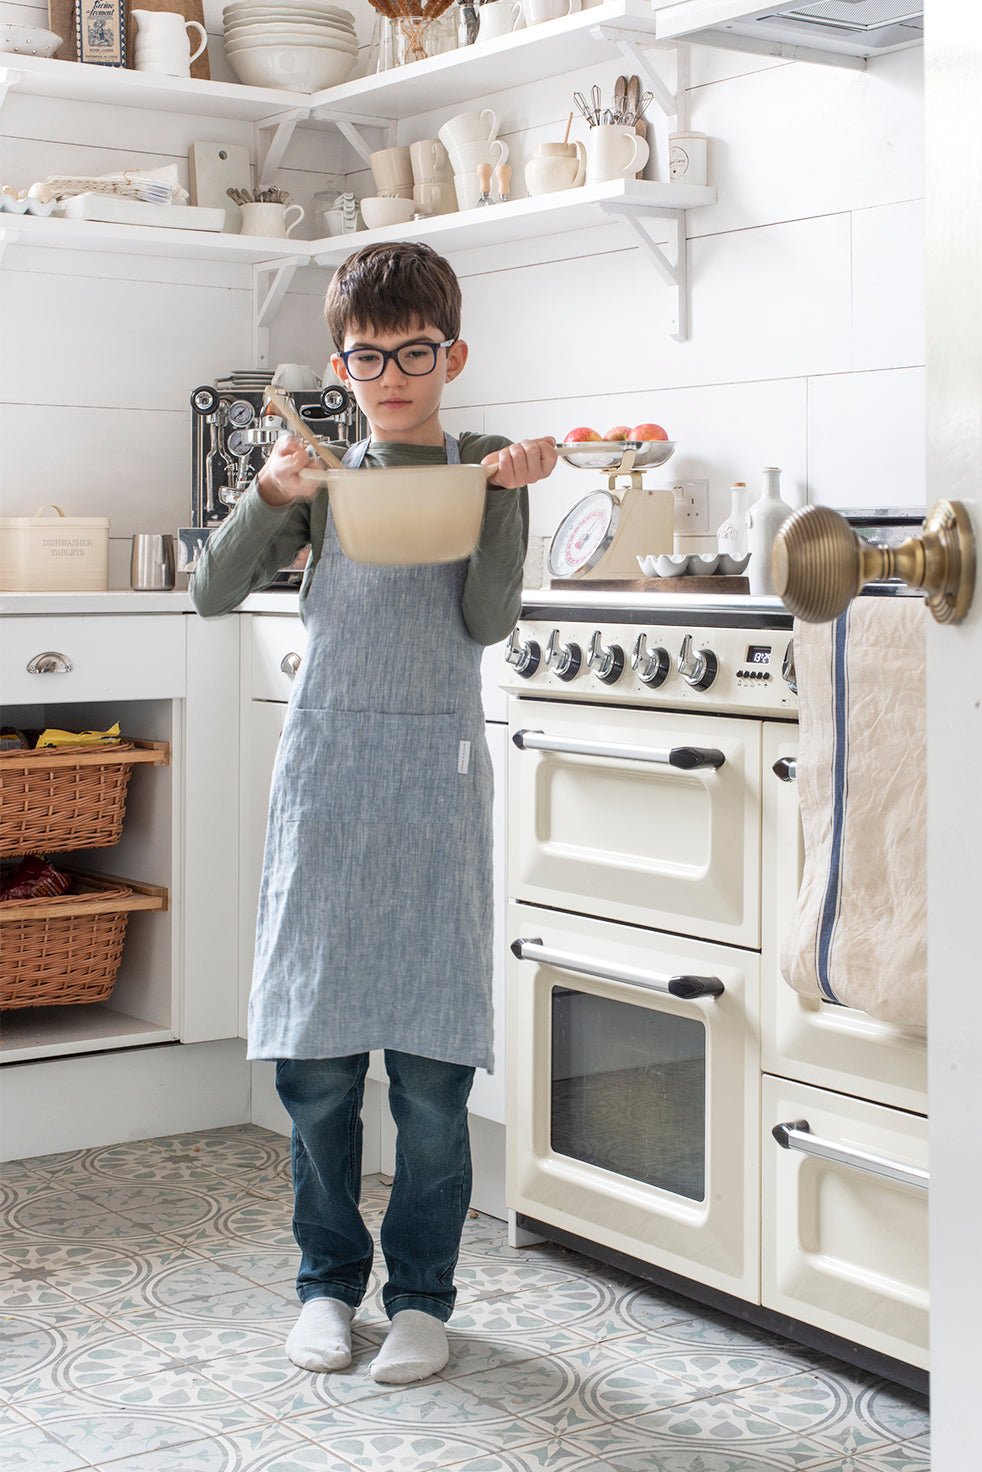 Handmade Stone Washed Children's 100% Linen Apron (Adjustable), Blue or Charcoal - White & Faded